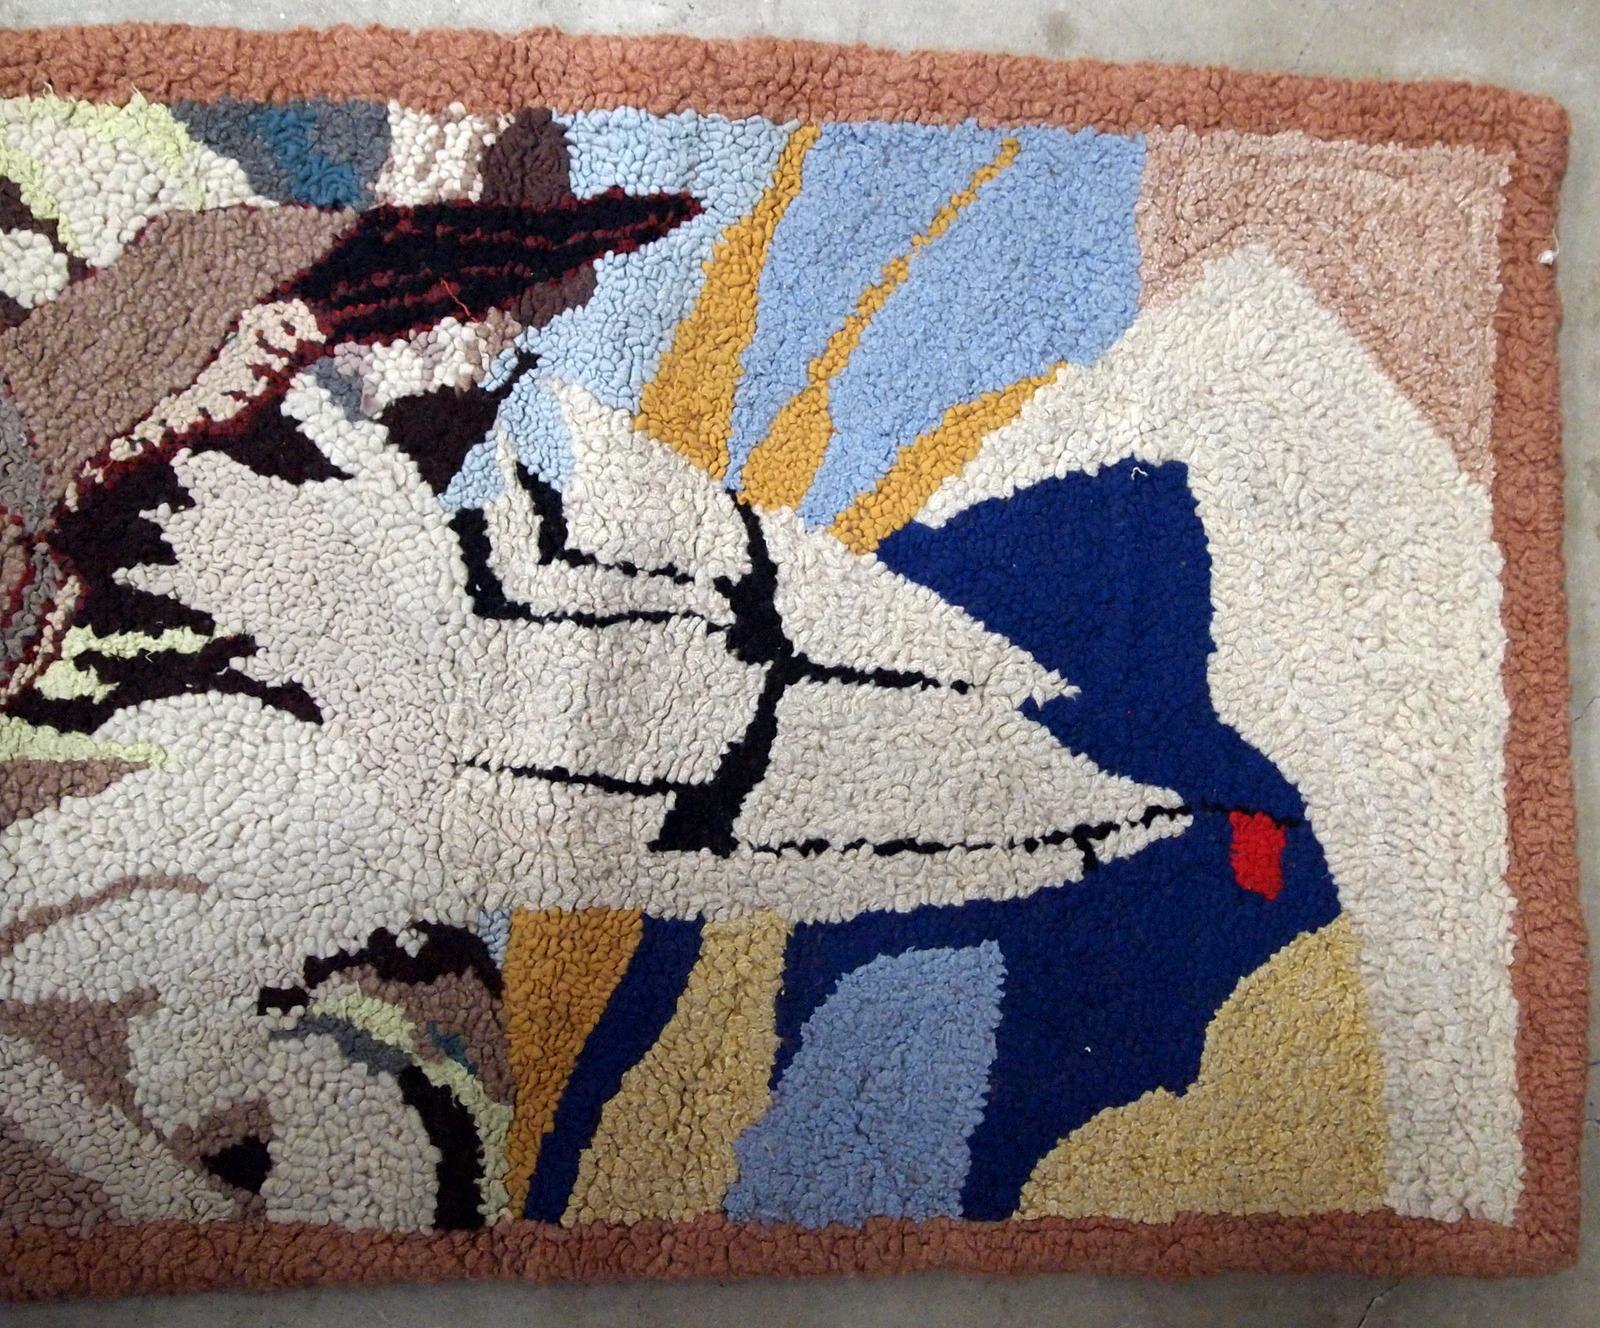 Handmade vintage American Hooked rug with eagle. The rug is from 1940s, it is in original good condition.
 